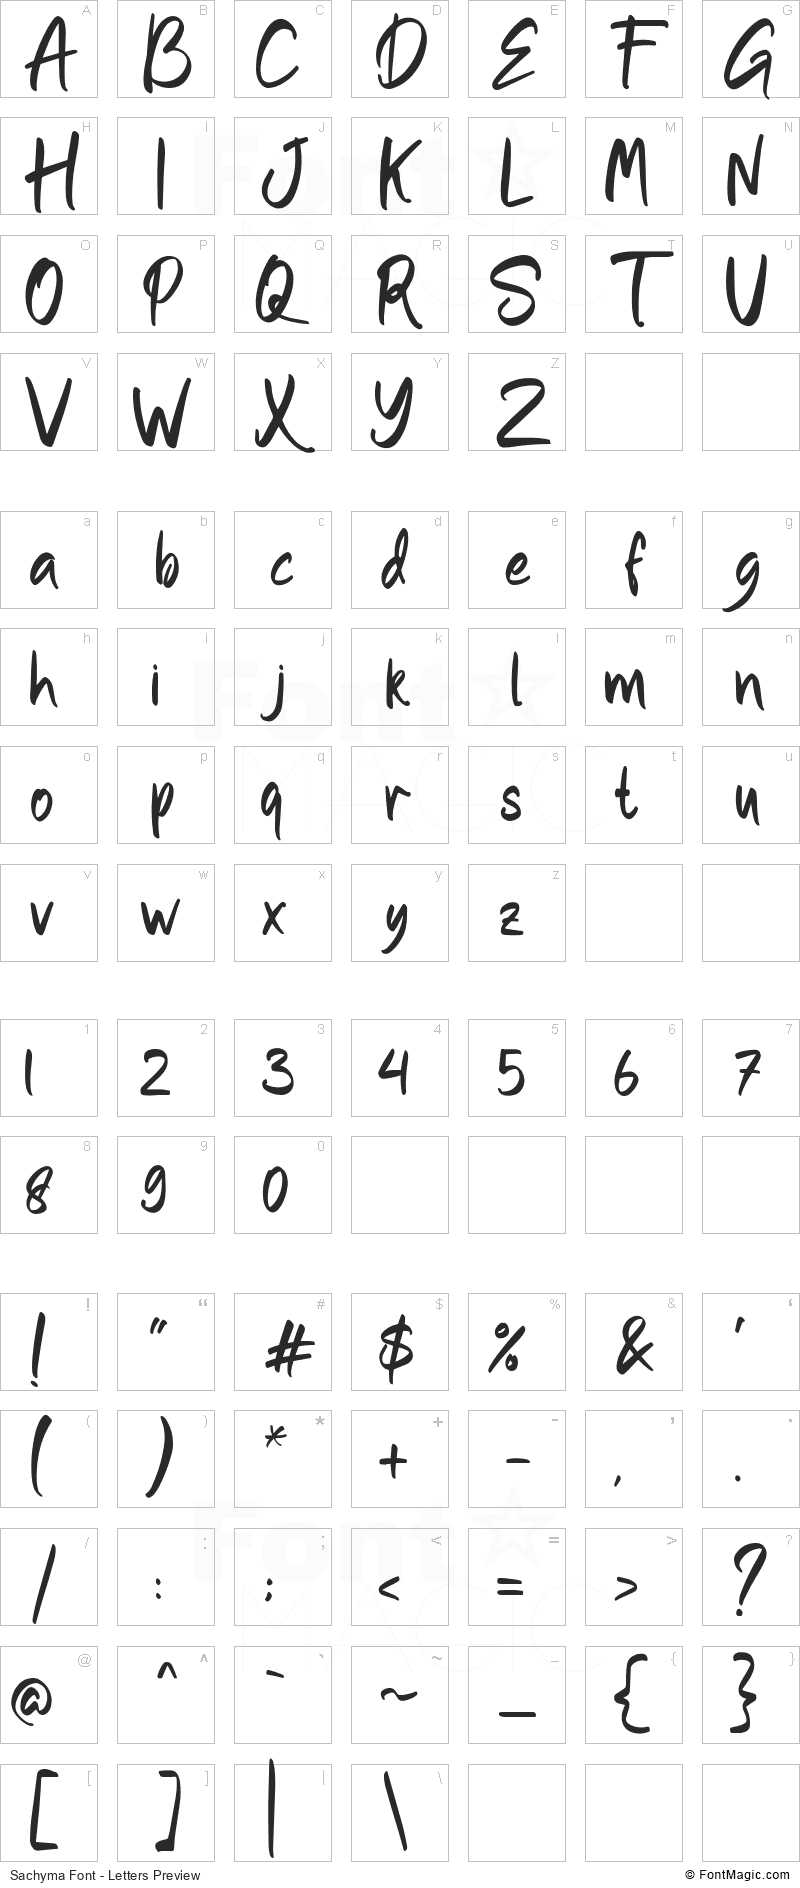 Sachyma Font - All Latters Preview Chart